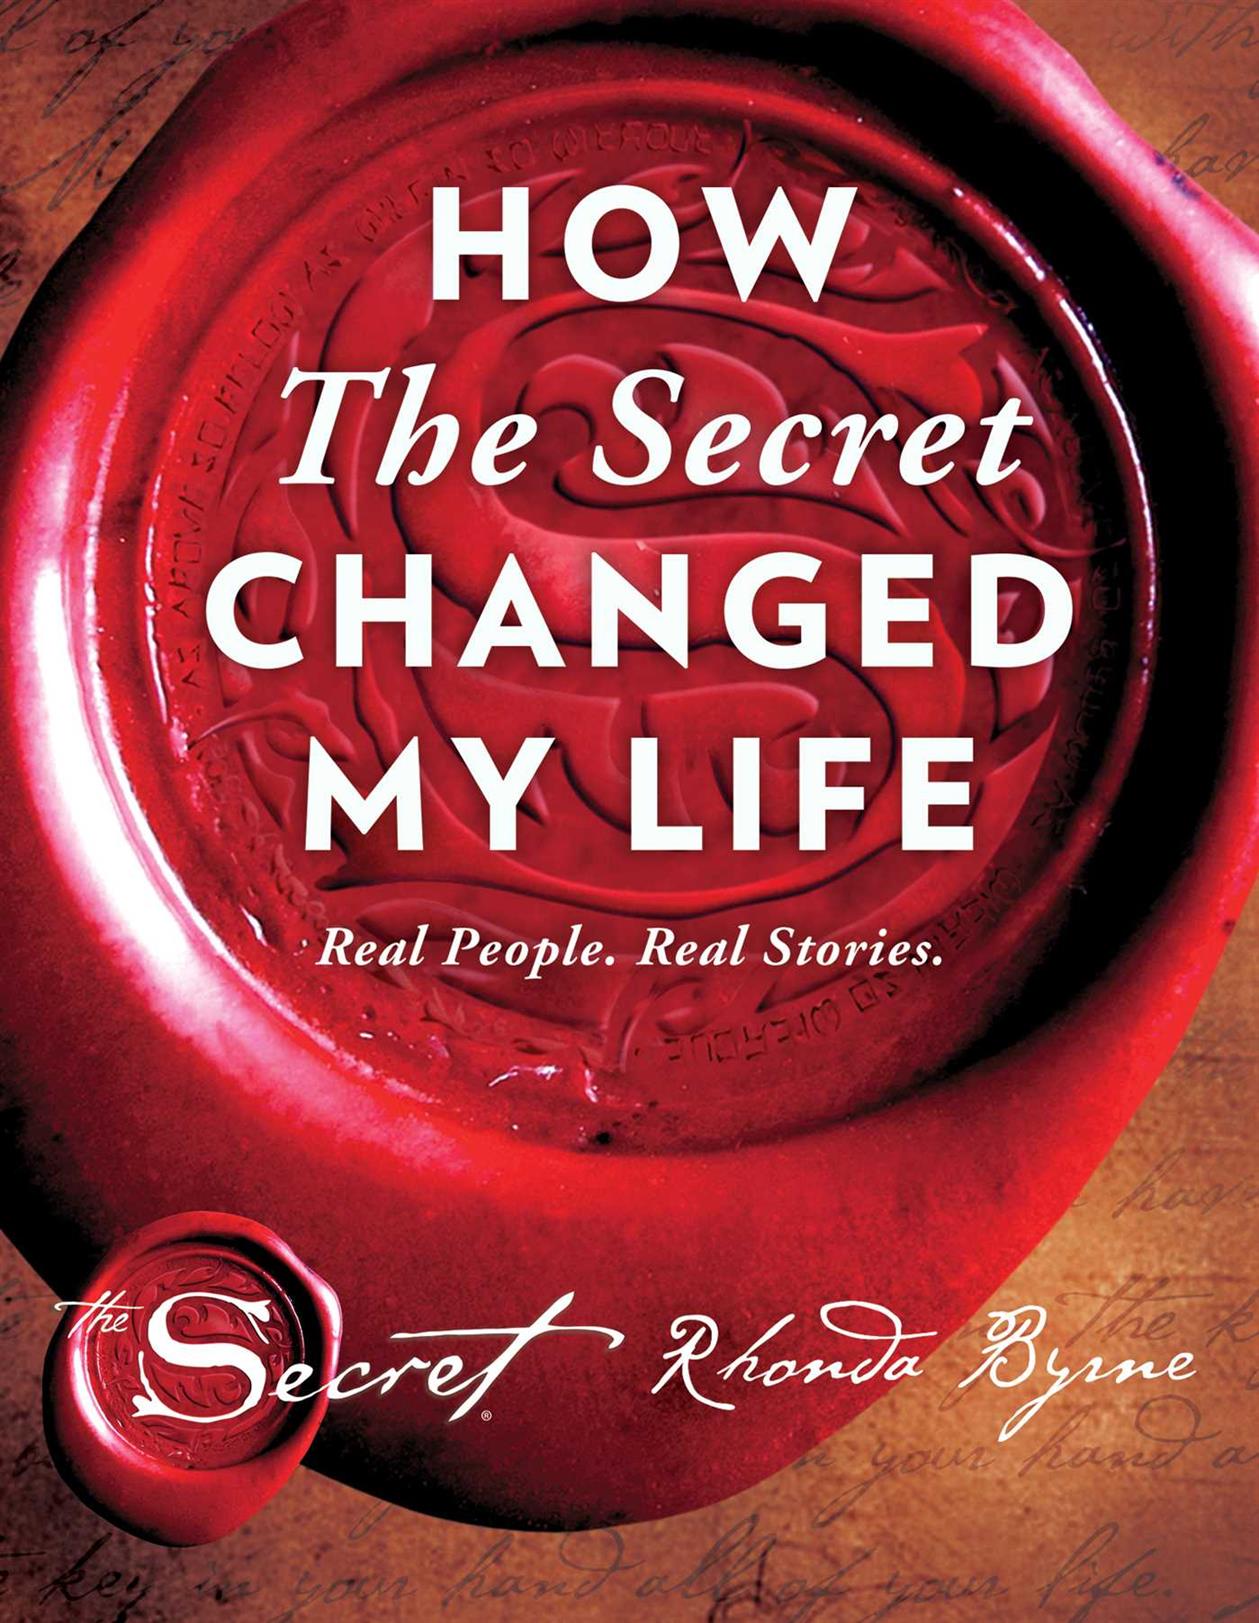 How the Secret Changed My Life Book by Rhonda Byrne